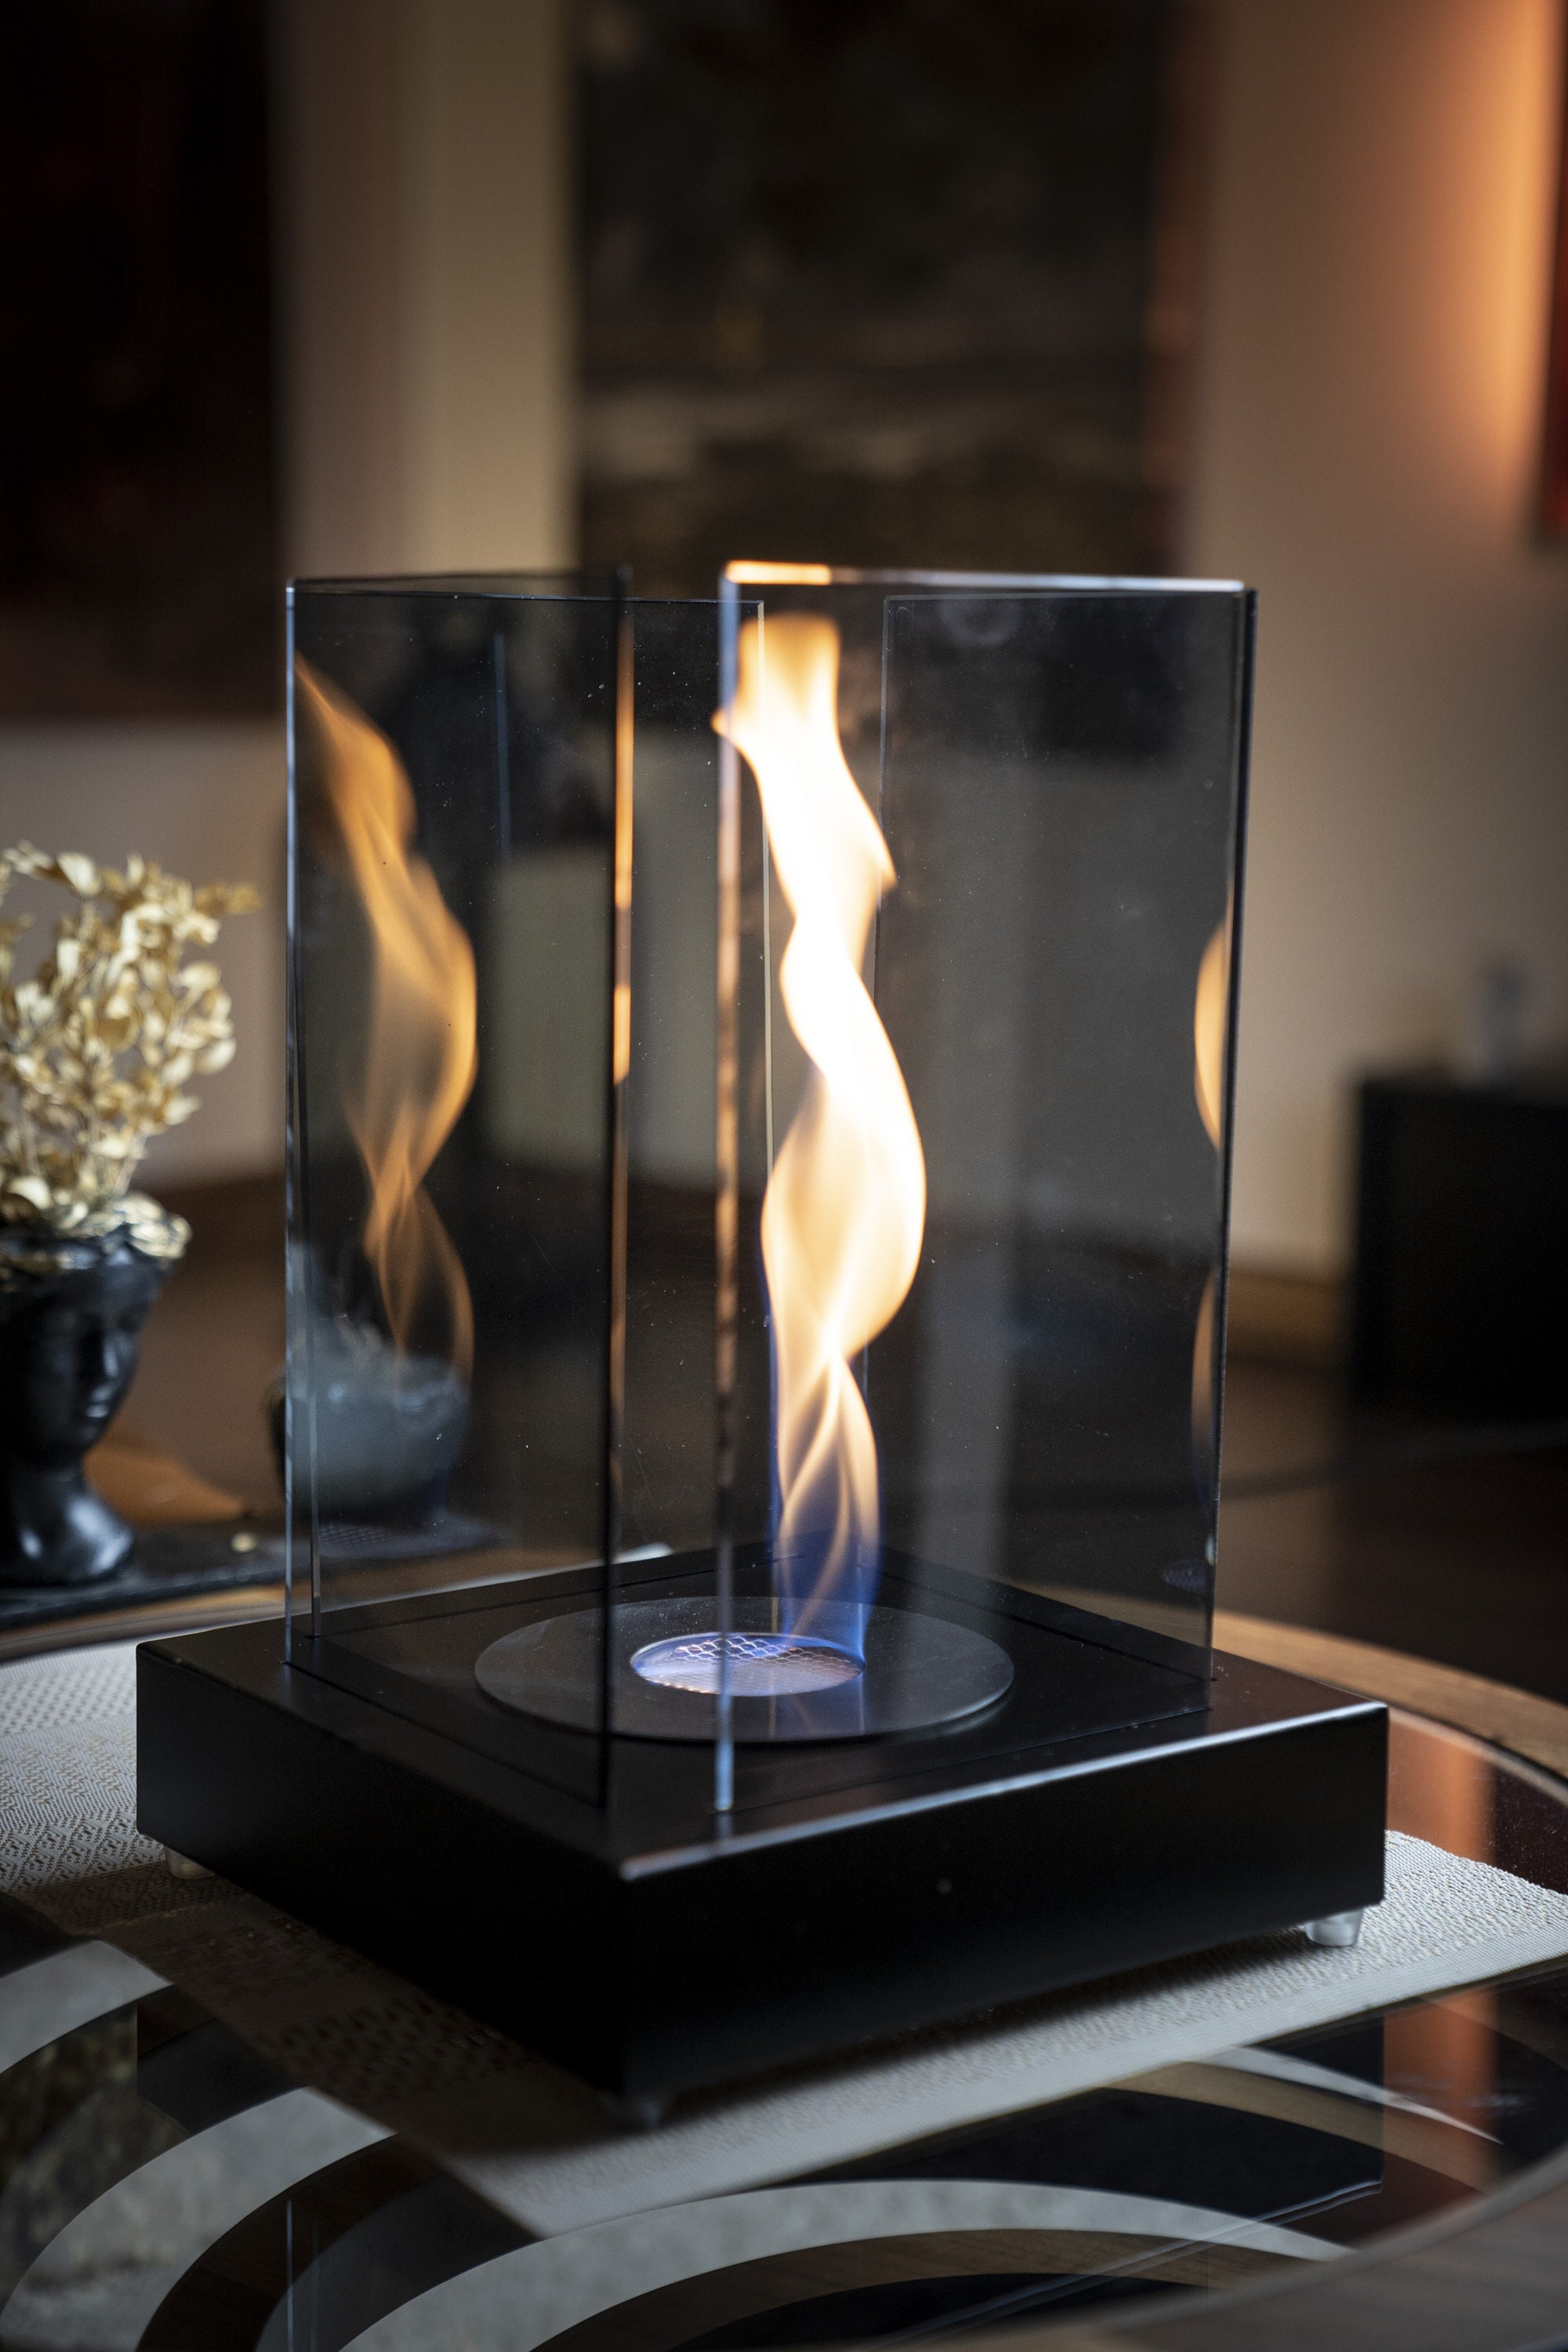 HOFAST SIPN 90 Table-top BLACK free standing bioethanol fireplace good  price to buy, Freestanding (Portal) biofireplaces - in an apartment,  house, and any room at a good price